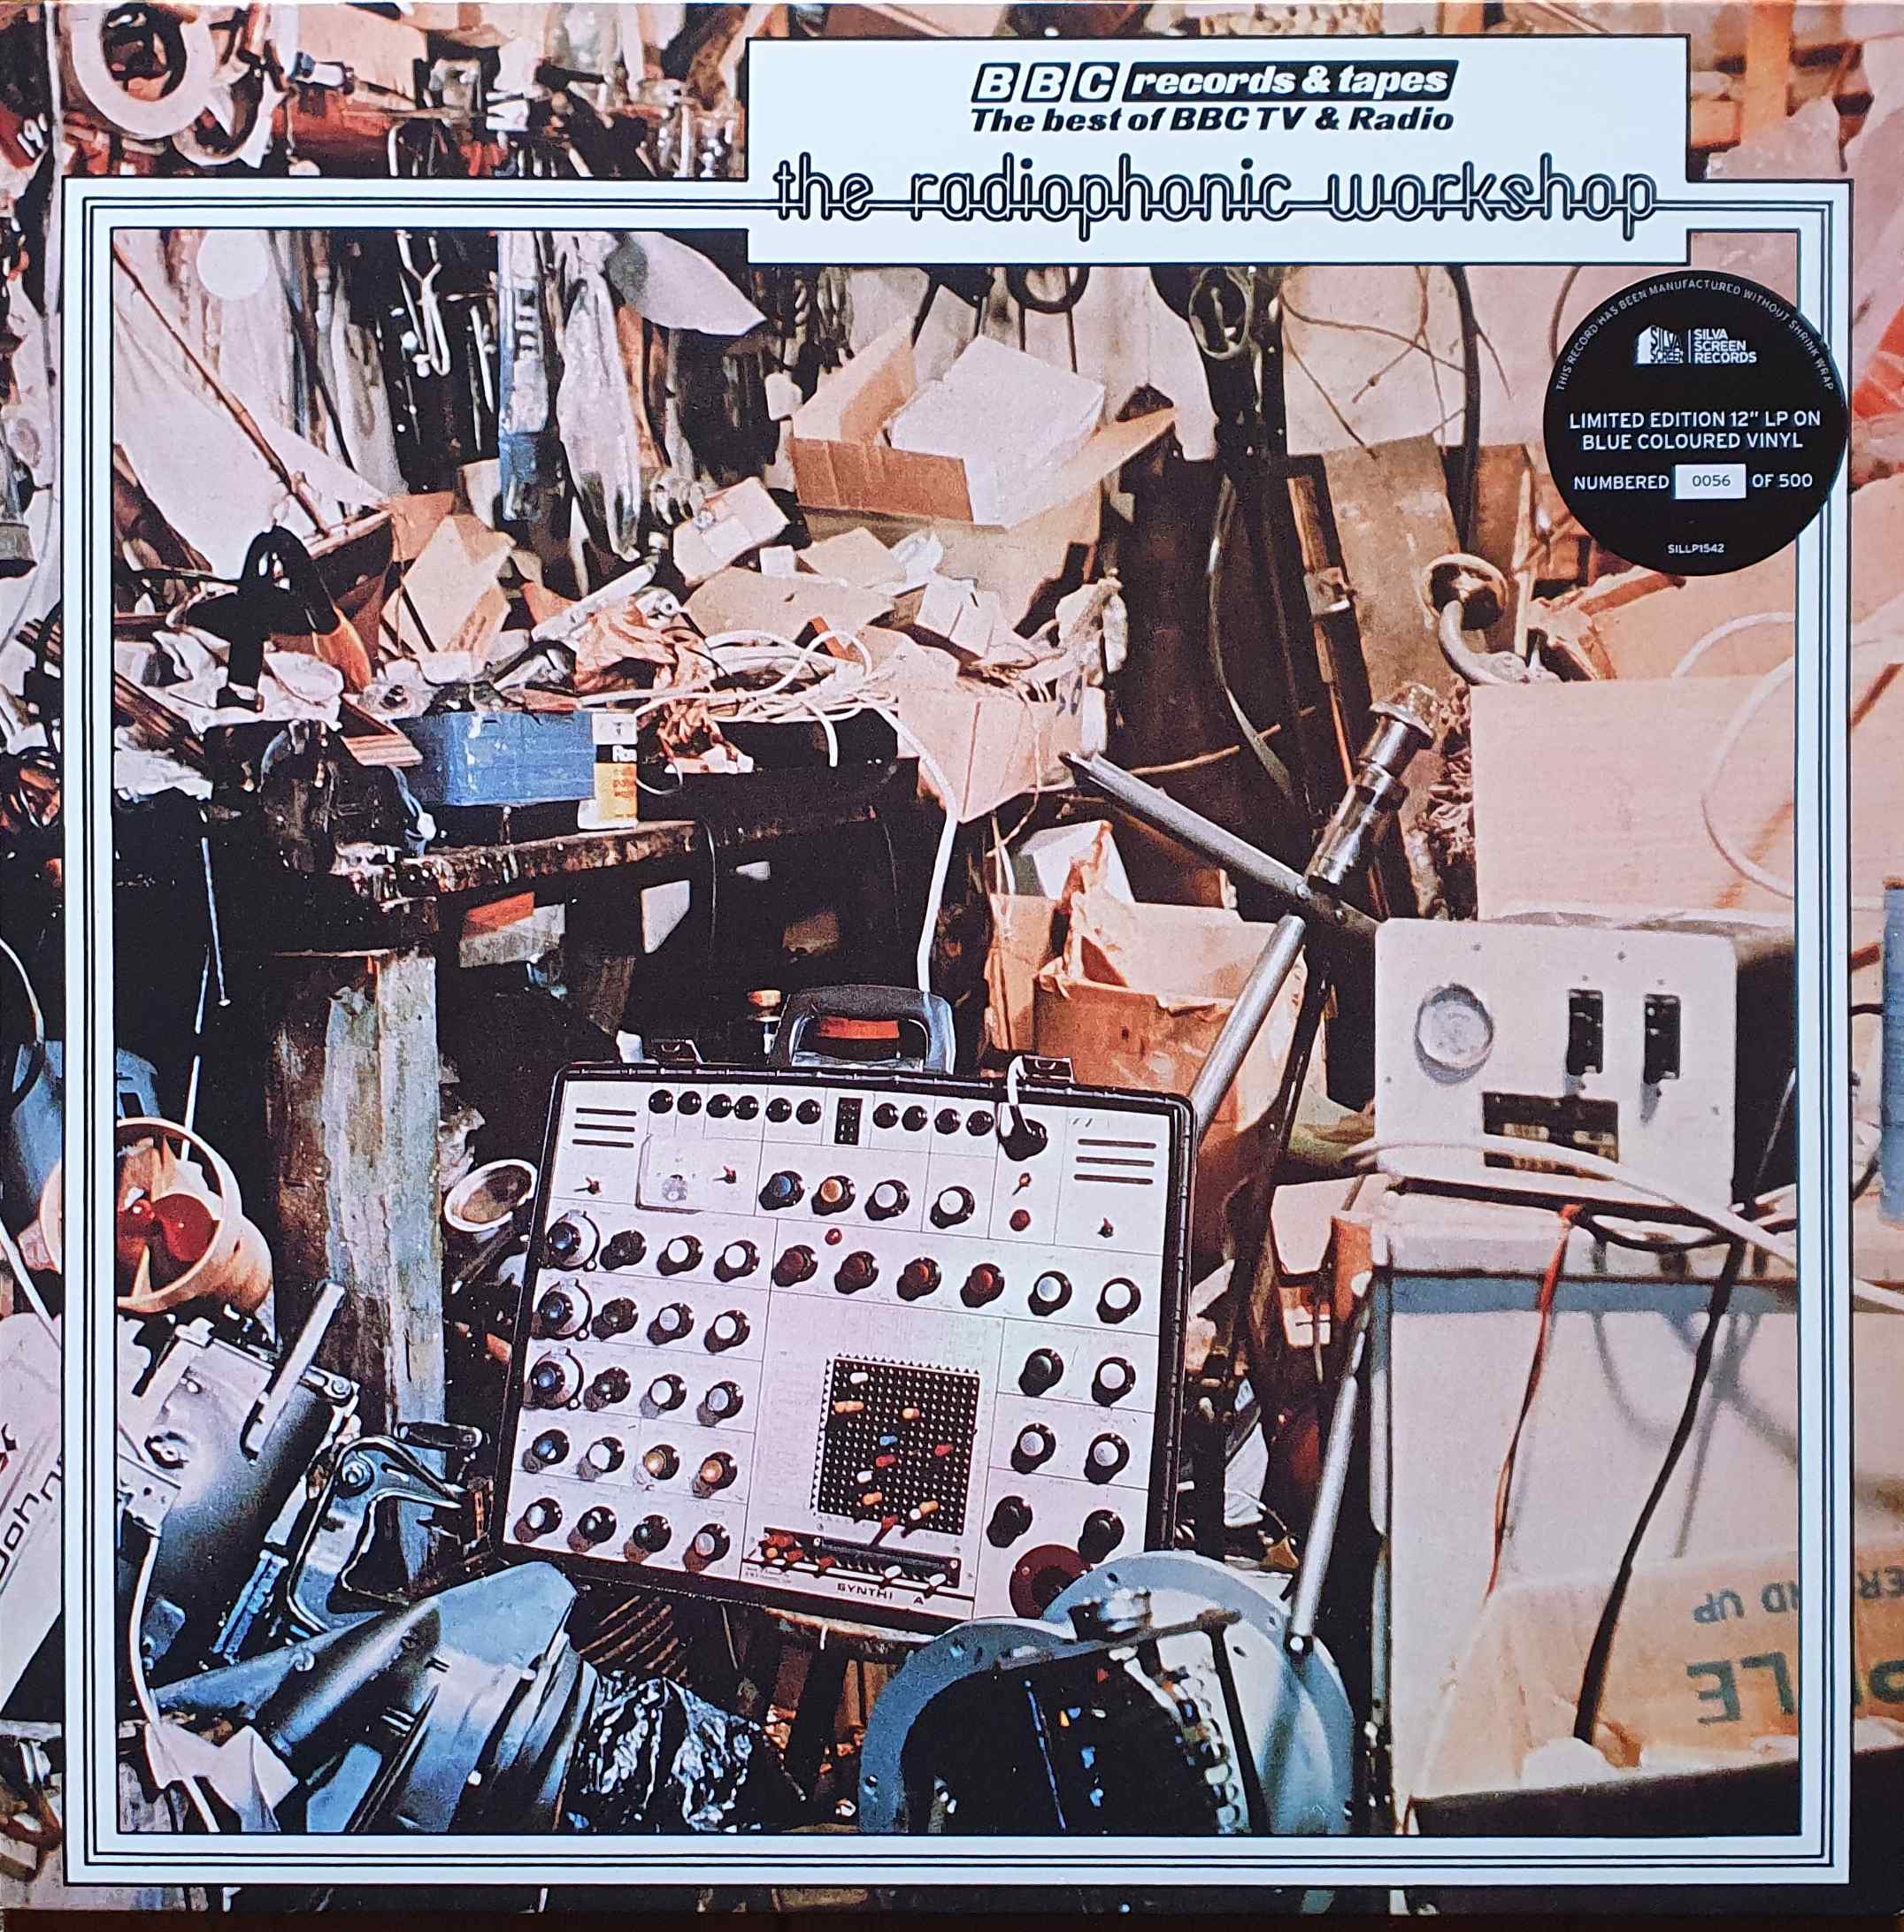 Picture of The Radiophonic Workshop by artist Various from the BBC albums - Records and Tapes library